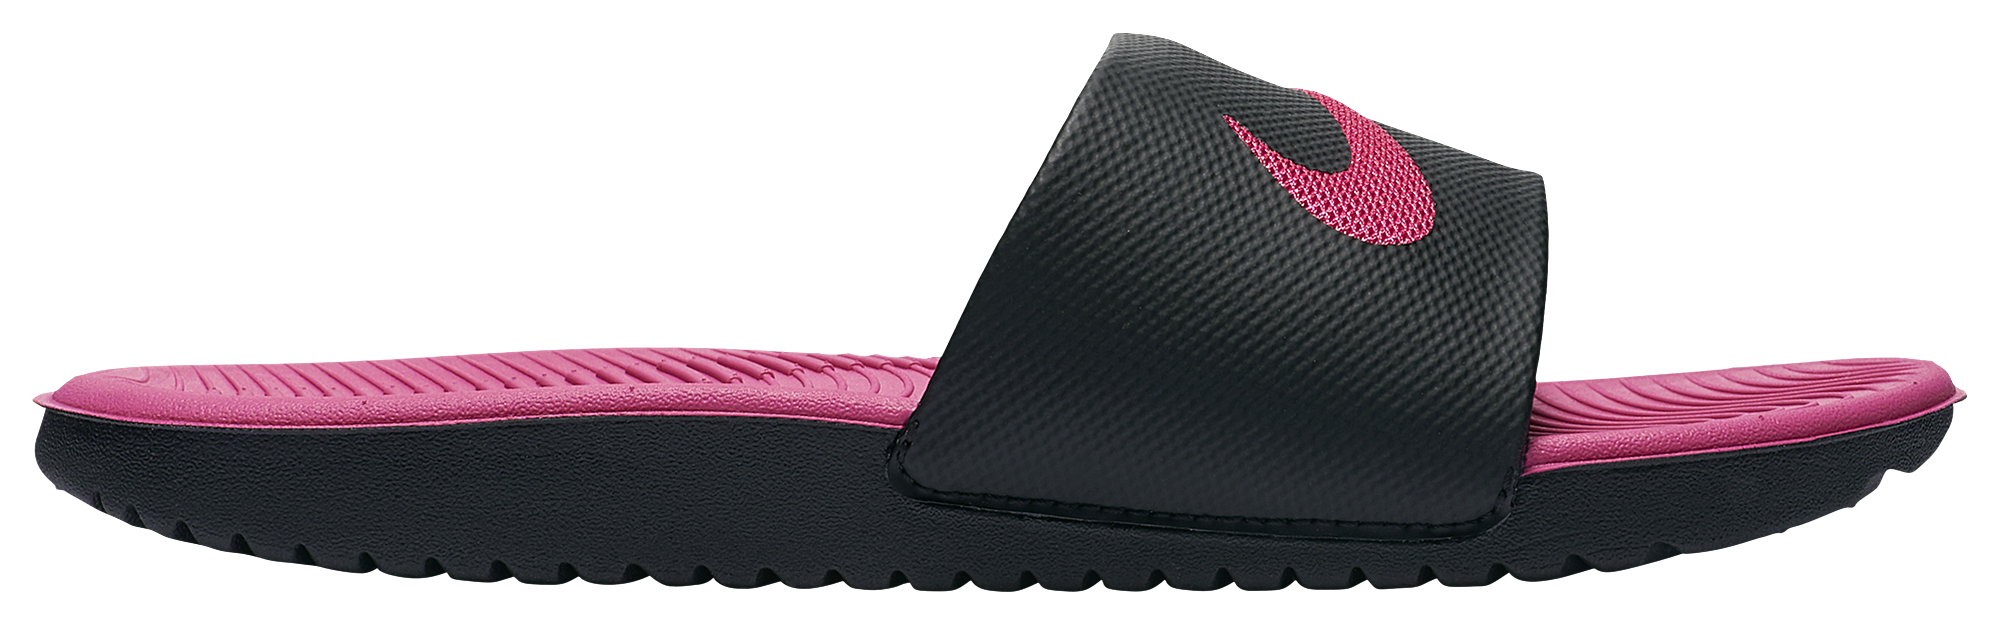 nike slippers pink and black